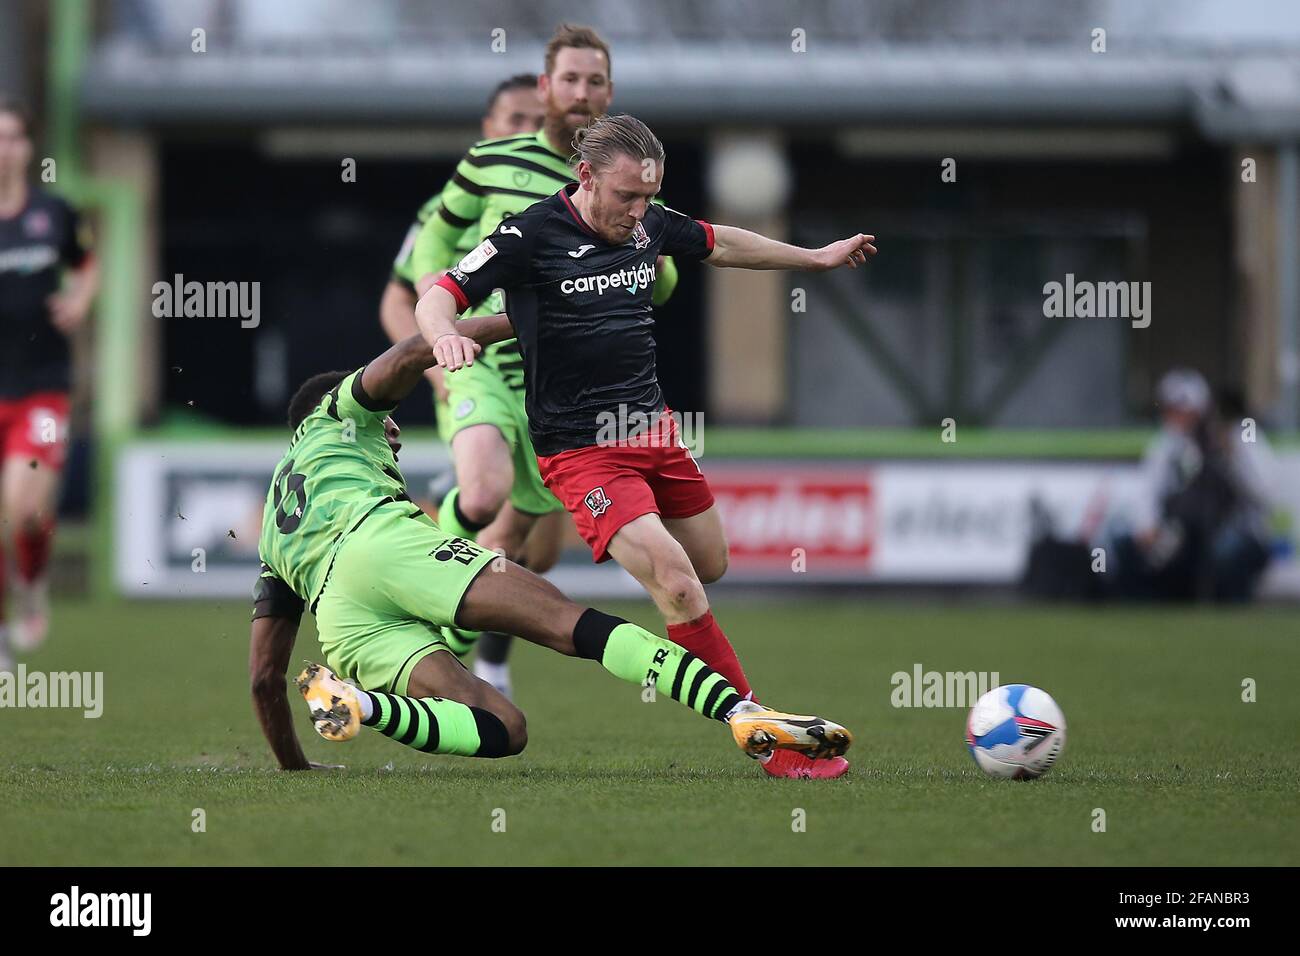 Ebou Adams of Forest Green Rovers tackles Matt Jay of Exeter City during the Sky Bet League 2 match between Forest Green Rovers and Exeter City at The Stock Photo